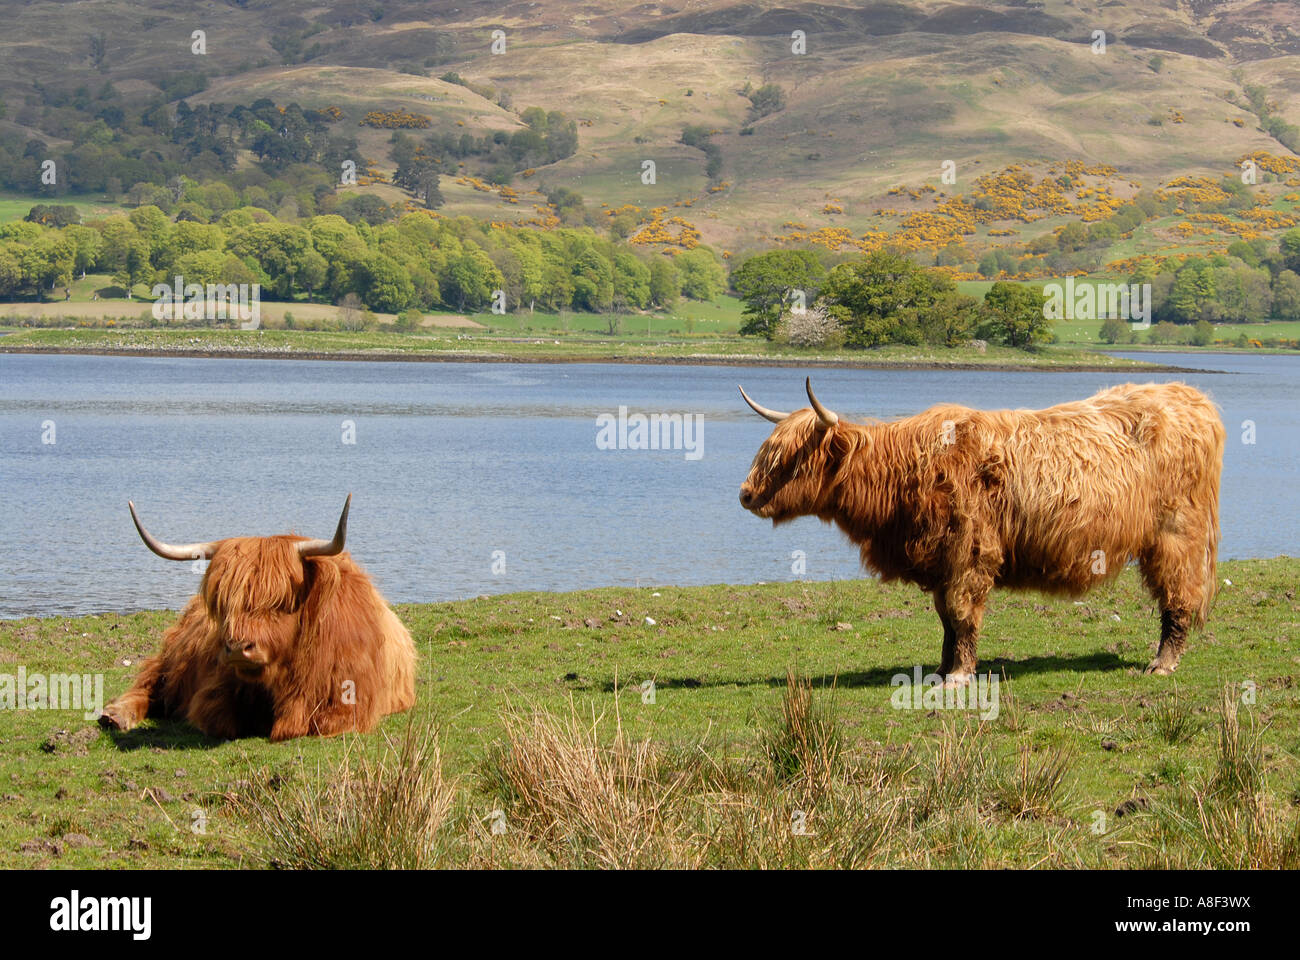 The Scottish LongHorn is often found grazing on farms in the highlands of Scotland, the Inner and Outer Hebrides. Stock Photo